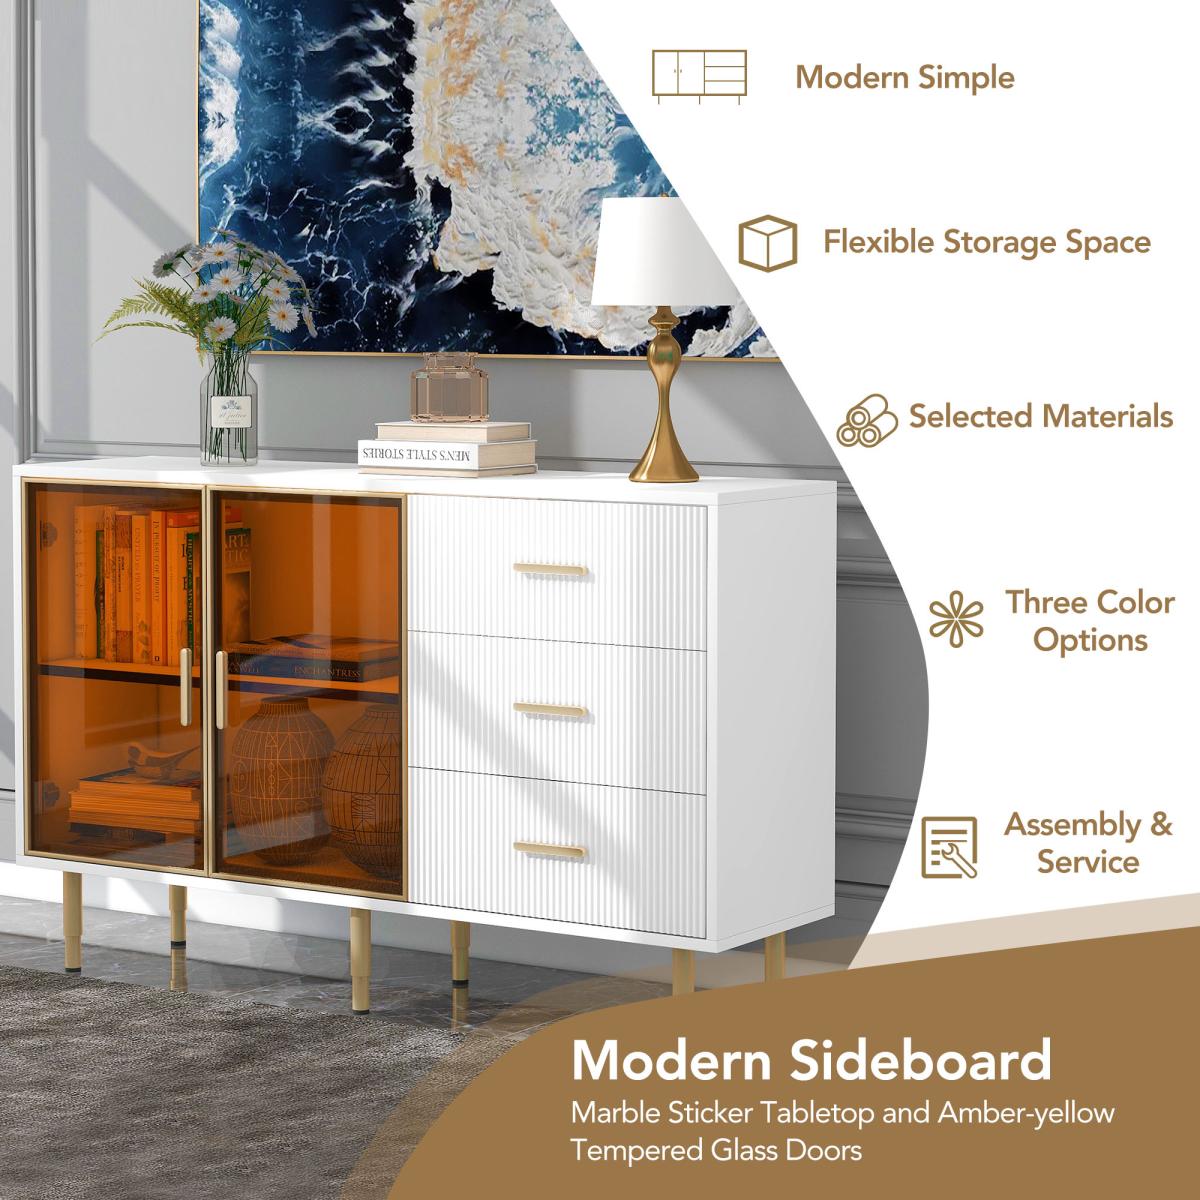 TREXM Modern Sideboard Mdf Buffet Cabinet Marble Sticker Tabletop and Amber-yellow Tempered Glass Doors with Gold Metal Legs & Handles (White)